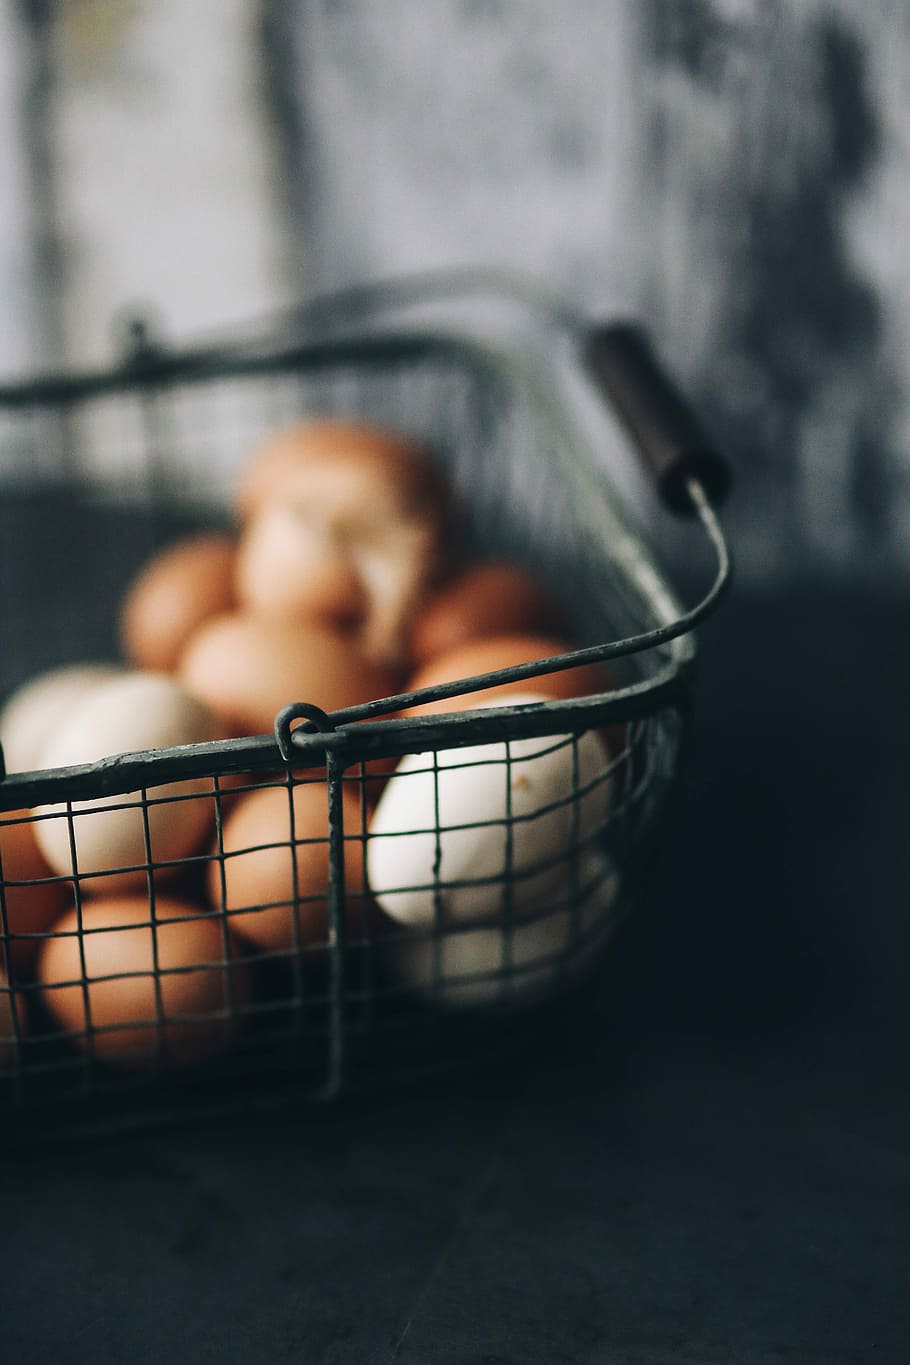 metal wire basket, eggs, Metal wire, basket, metal, wire, food, food and drink, one animal, close-up